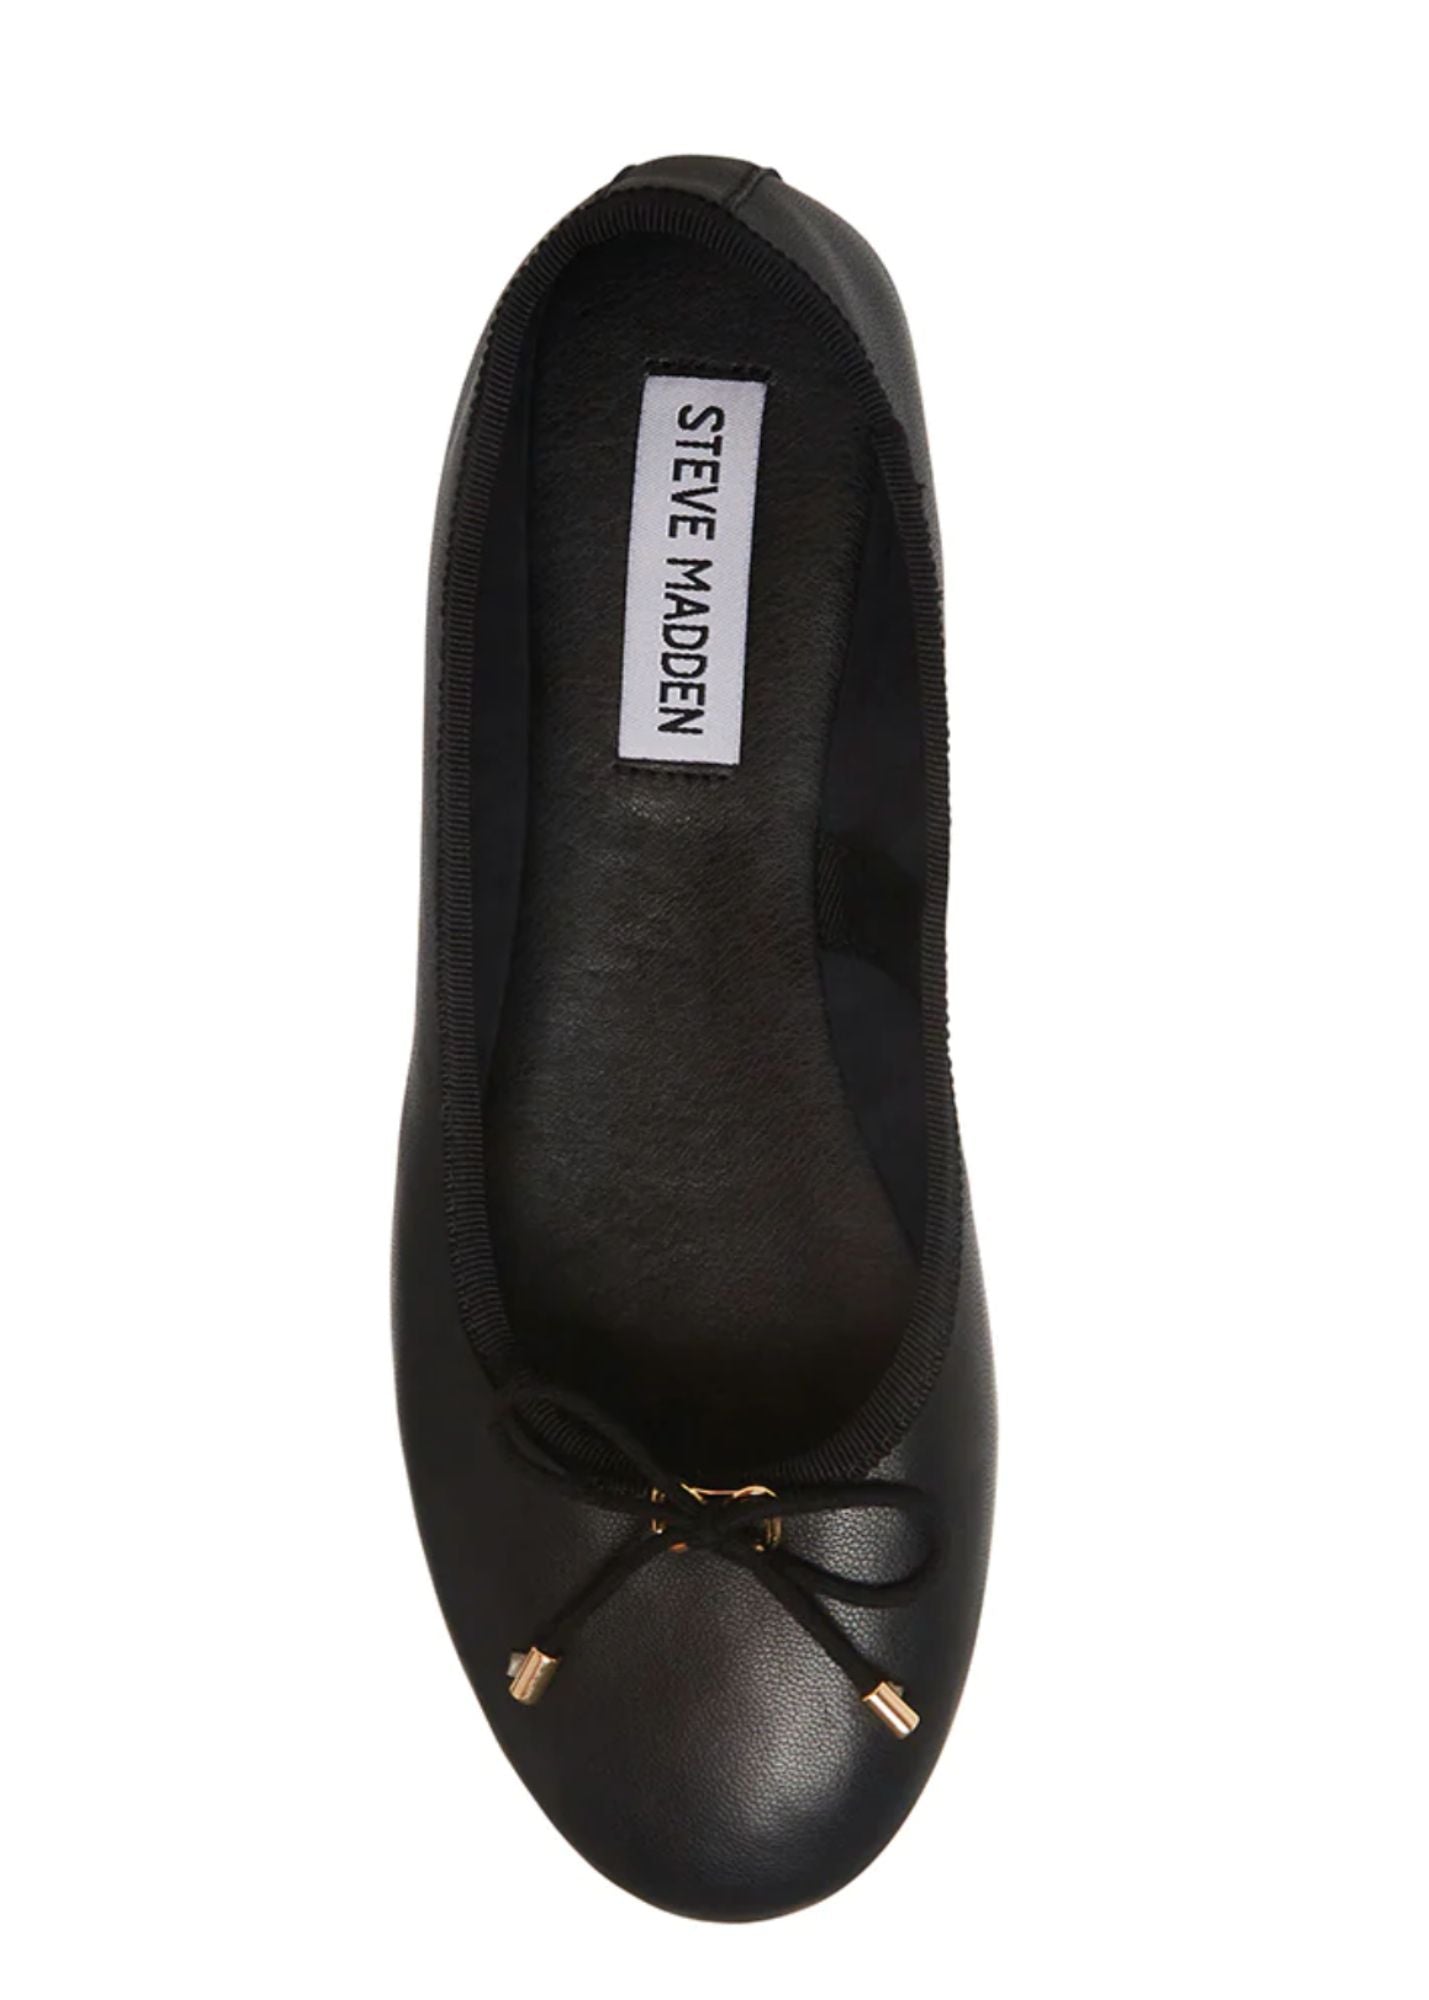 Blossoms Black Leather Flat Shoes